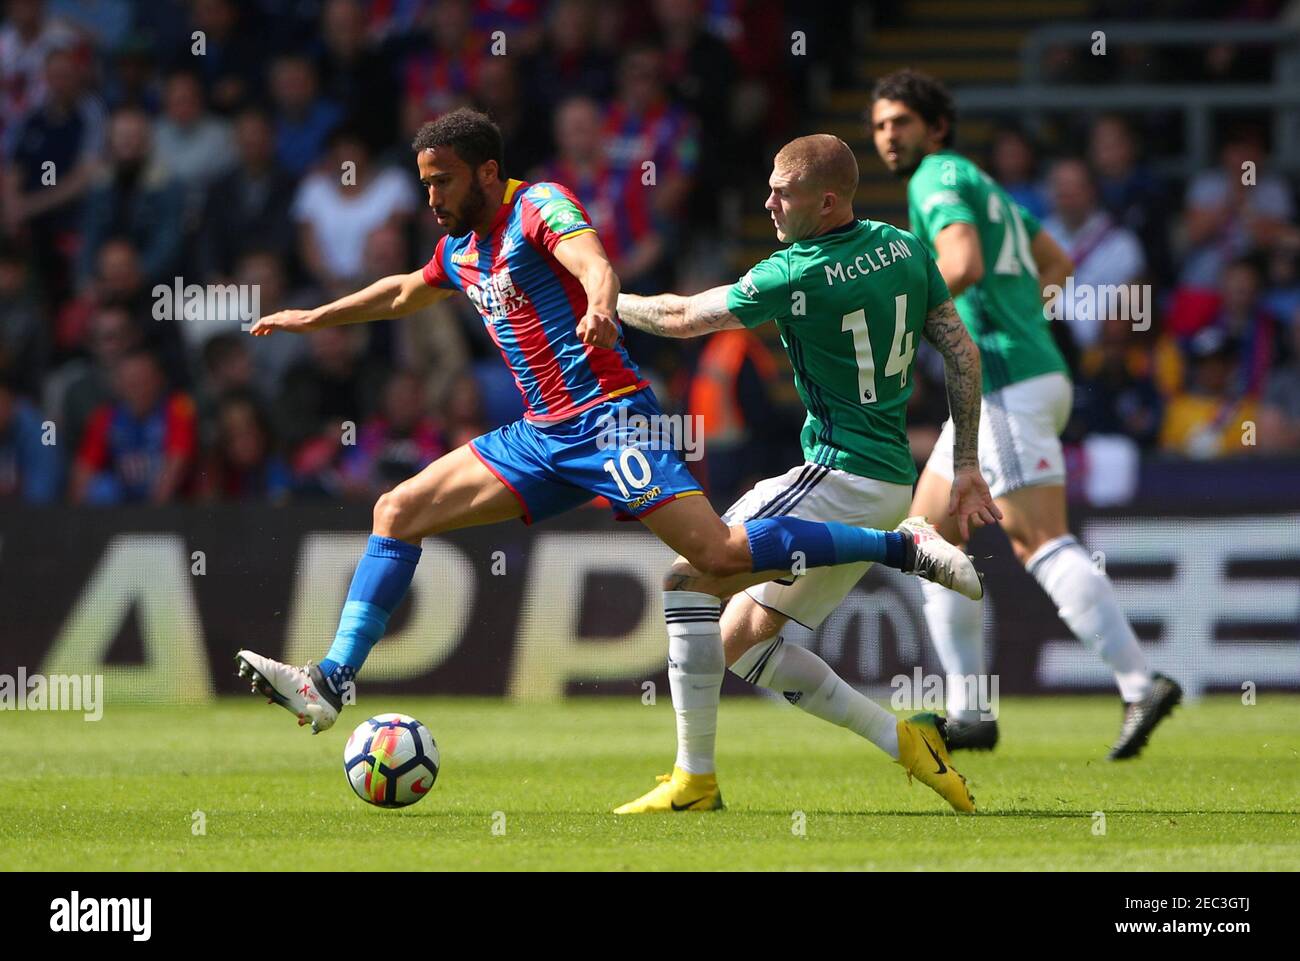 Soccer Football - Premier League - Crystal Palace vs West Bromwich Albion - Selhurst Park, London, Britain - May 13, 2018   Crystal Palace's Andros Townsend in action with West Bromwich Albion's James McClean    REUTERS/Hannah McKay    EDITORIAL USE ONLY. No use with unauthorized audio, video, data, fixture lists, club/league logos or 'live' services. Online in-match use limited to 75 images, no video emulation. No use in betting, games or single club/league/player publications.  Please contact your account representative for further details. Stock Photo